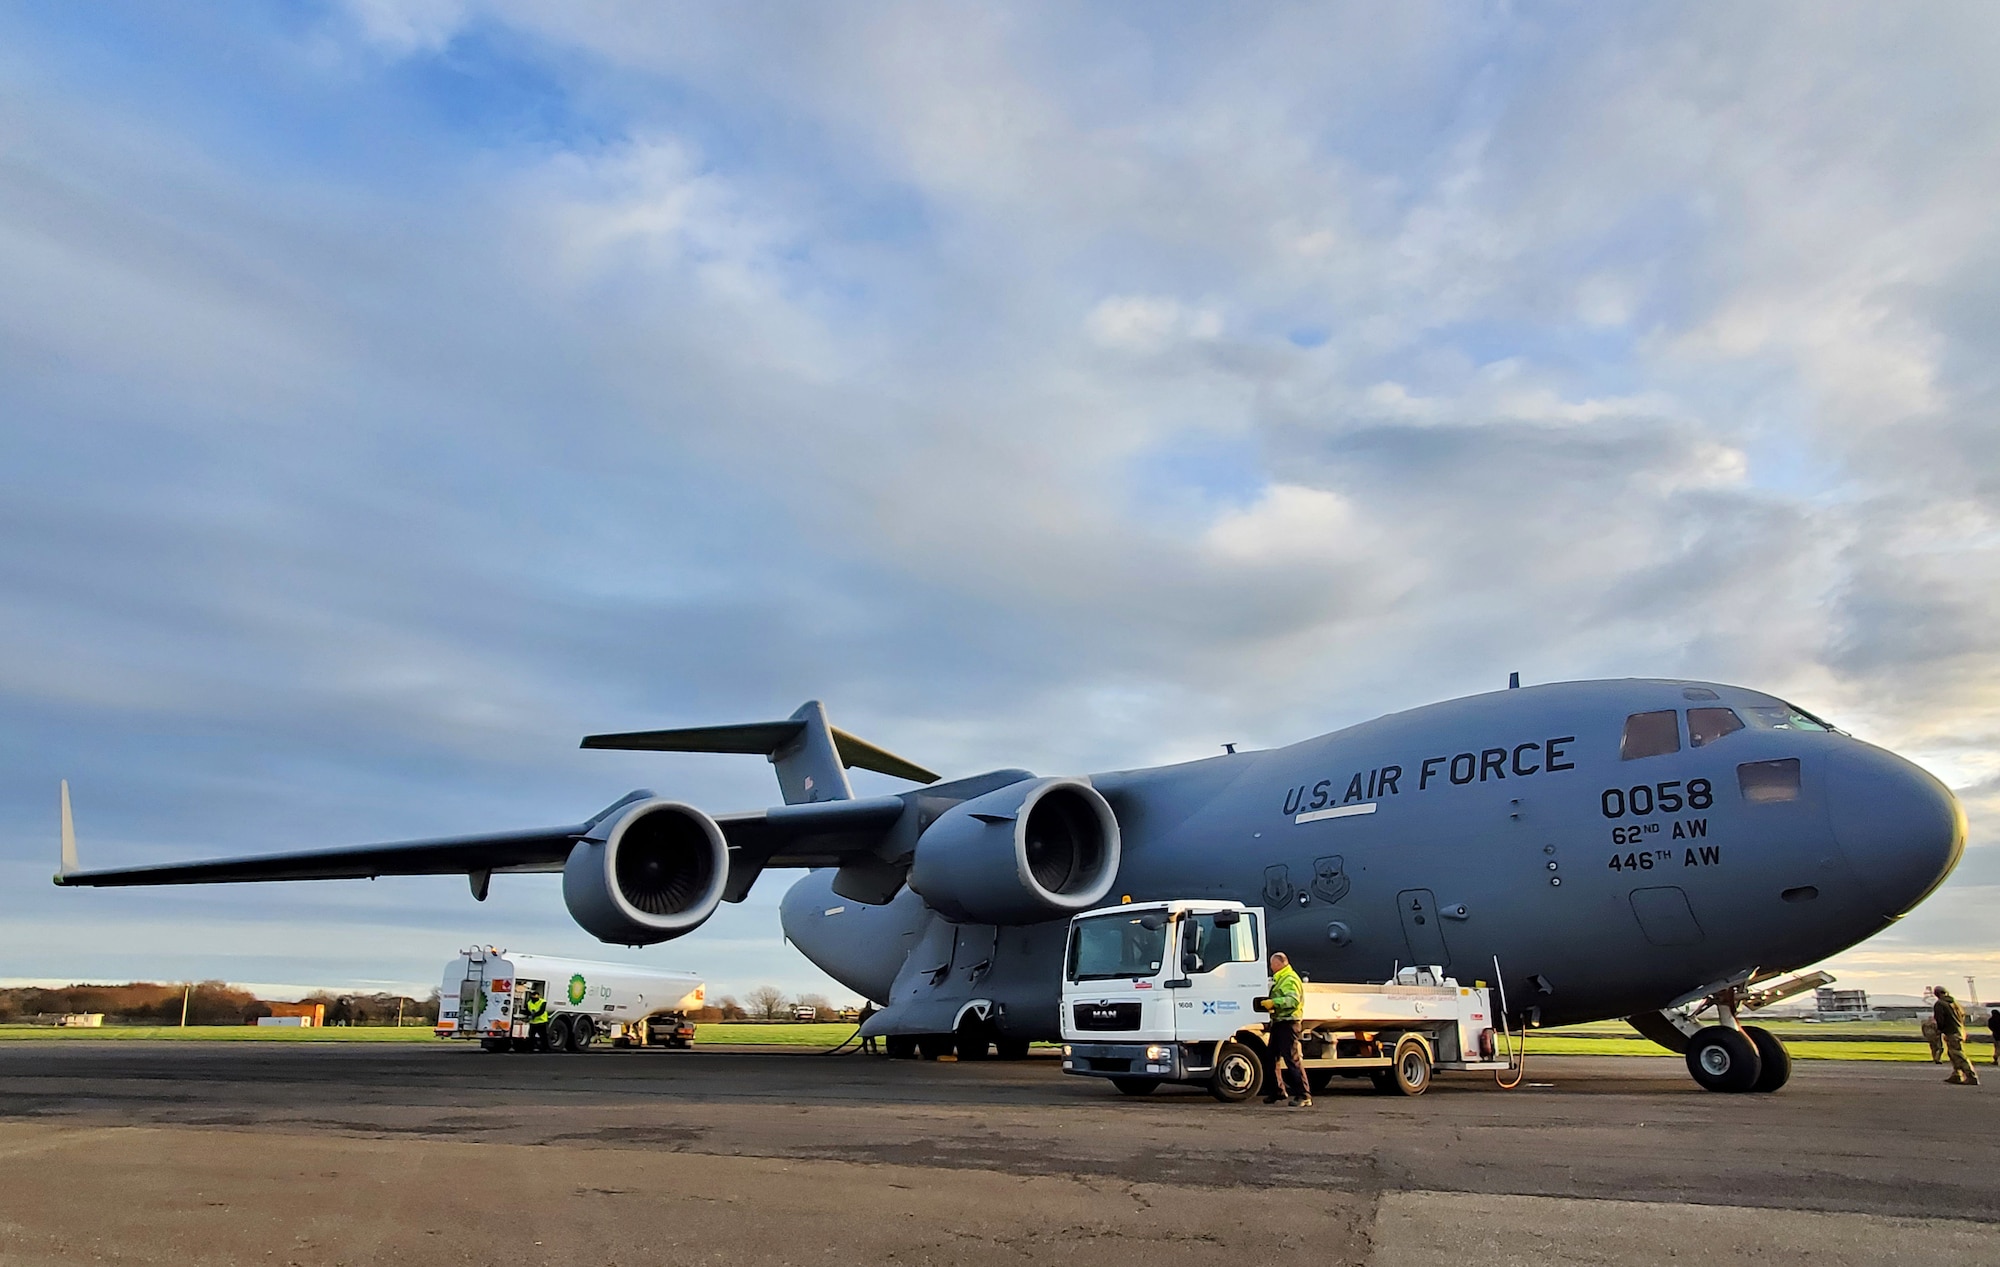 A C-17 Globemaster III assigned to Joint Base Lewis-McChord, Washington, sits on the flightline at Glasgow Prestwick Airport in Prestwick, Scotland, Dec. 2, 2021. U.S. Airmen assigned to JBLM, Joint Base McGuire-Dix-Lakehurst, New Jersey and Dover Air Force Base, Delaware, were transported back to the U.S. on the C-17 after being deployed at Al Udeid Air Base, Qatar, for several months. (U.S. Air Force photo by Staff Sgt. Tryphena Mayhugh)